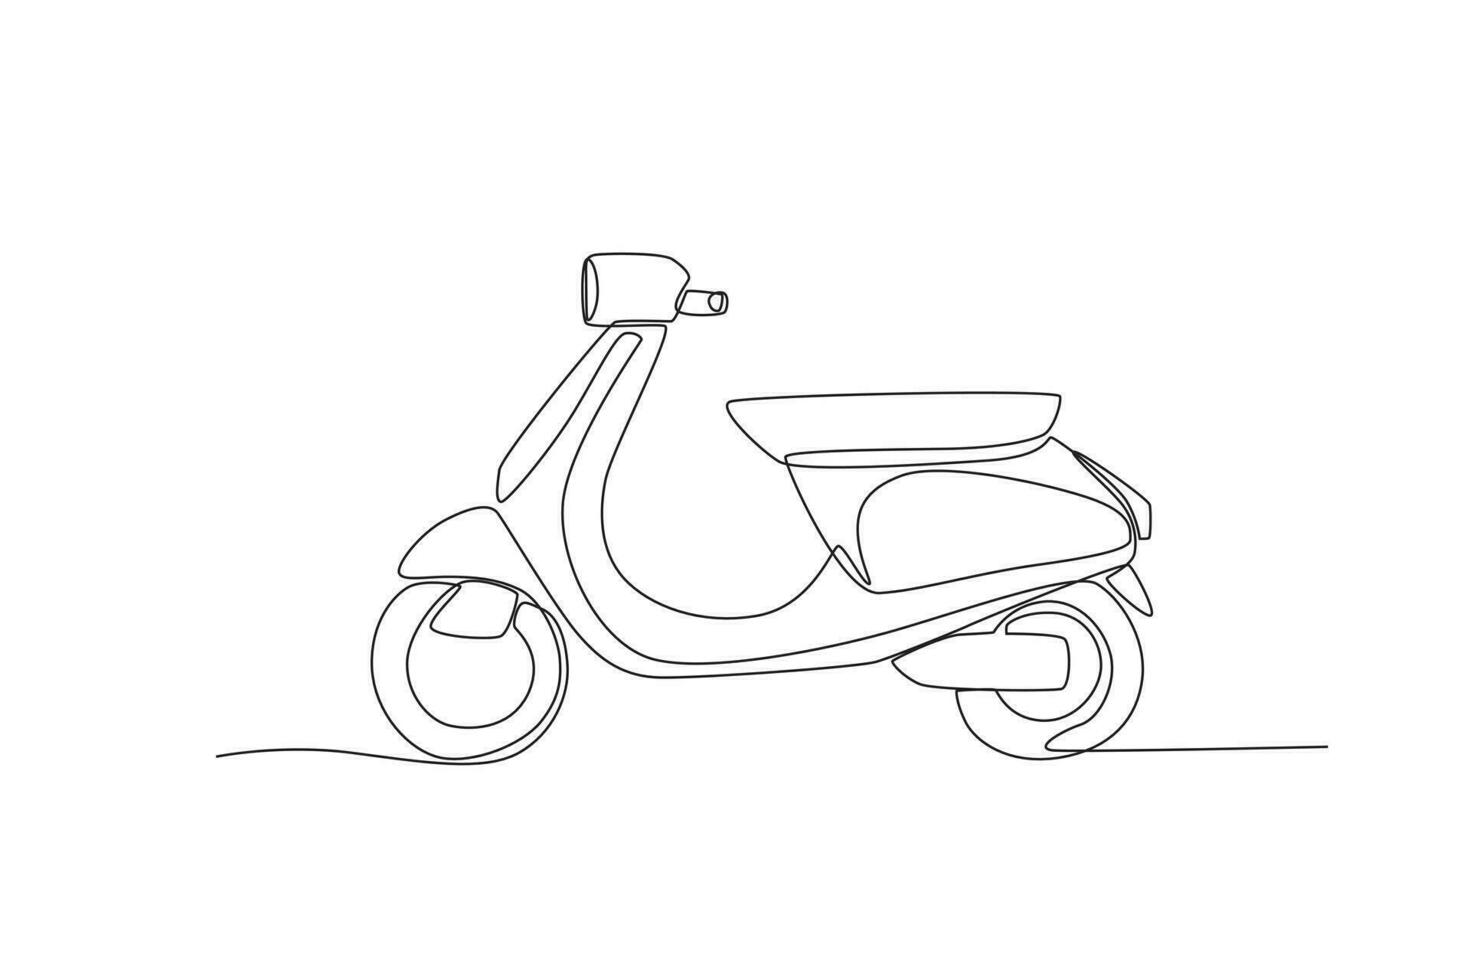 A two-wheeled motor vehicle vector